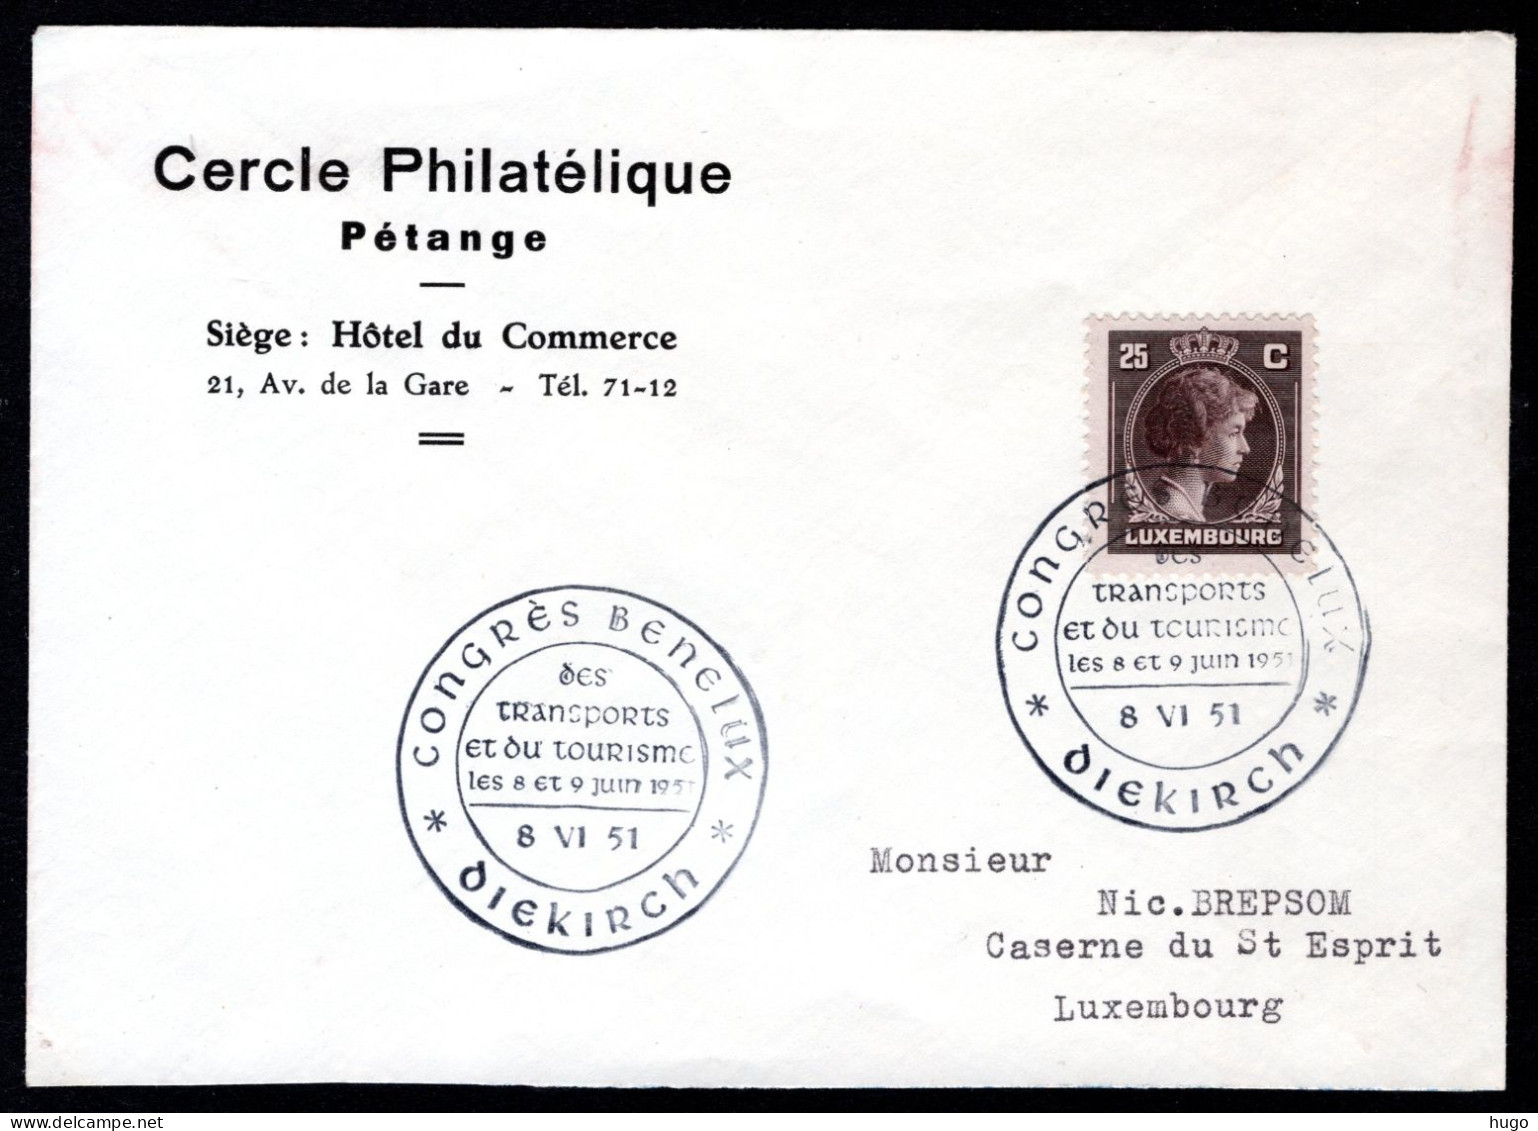 LUXEMBURG Yt. 337 FDC 1951 - Congres Benelux Diekirch - Lettres & Documents